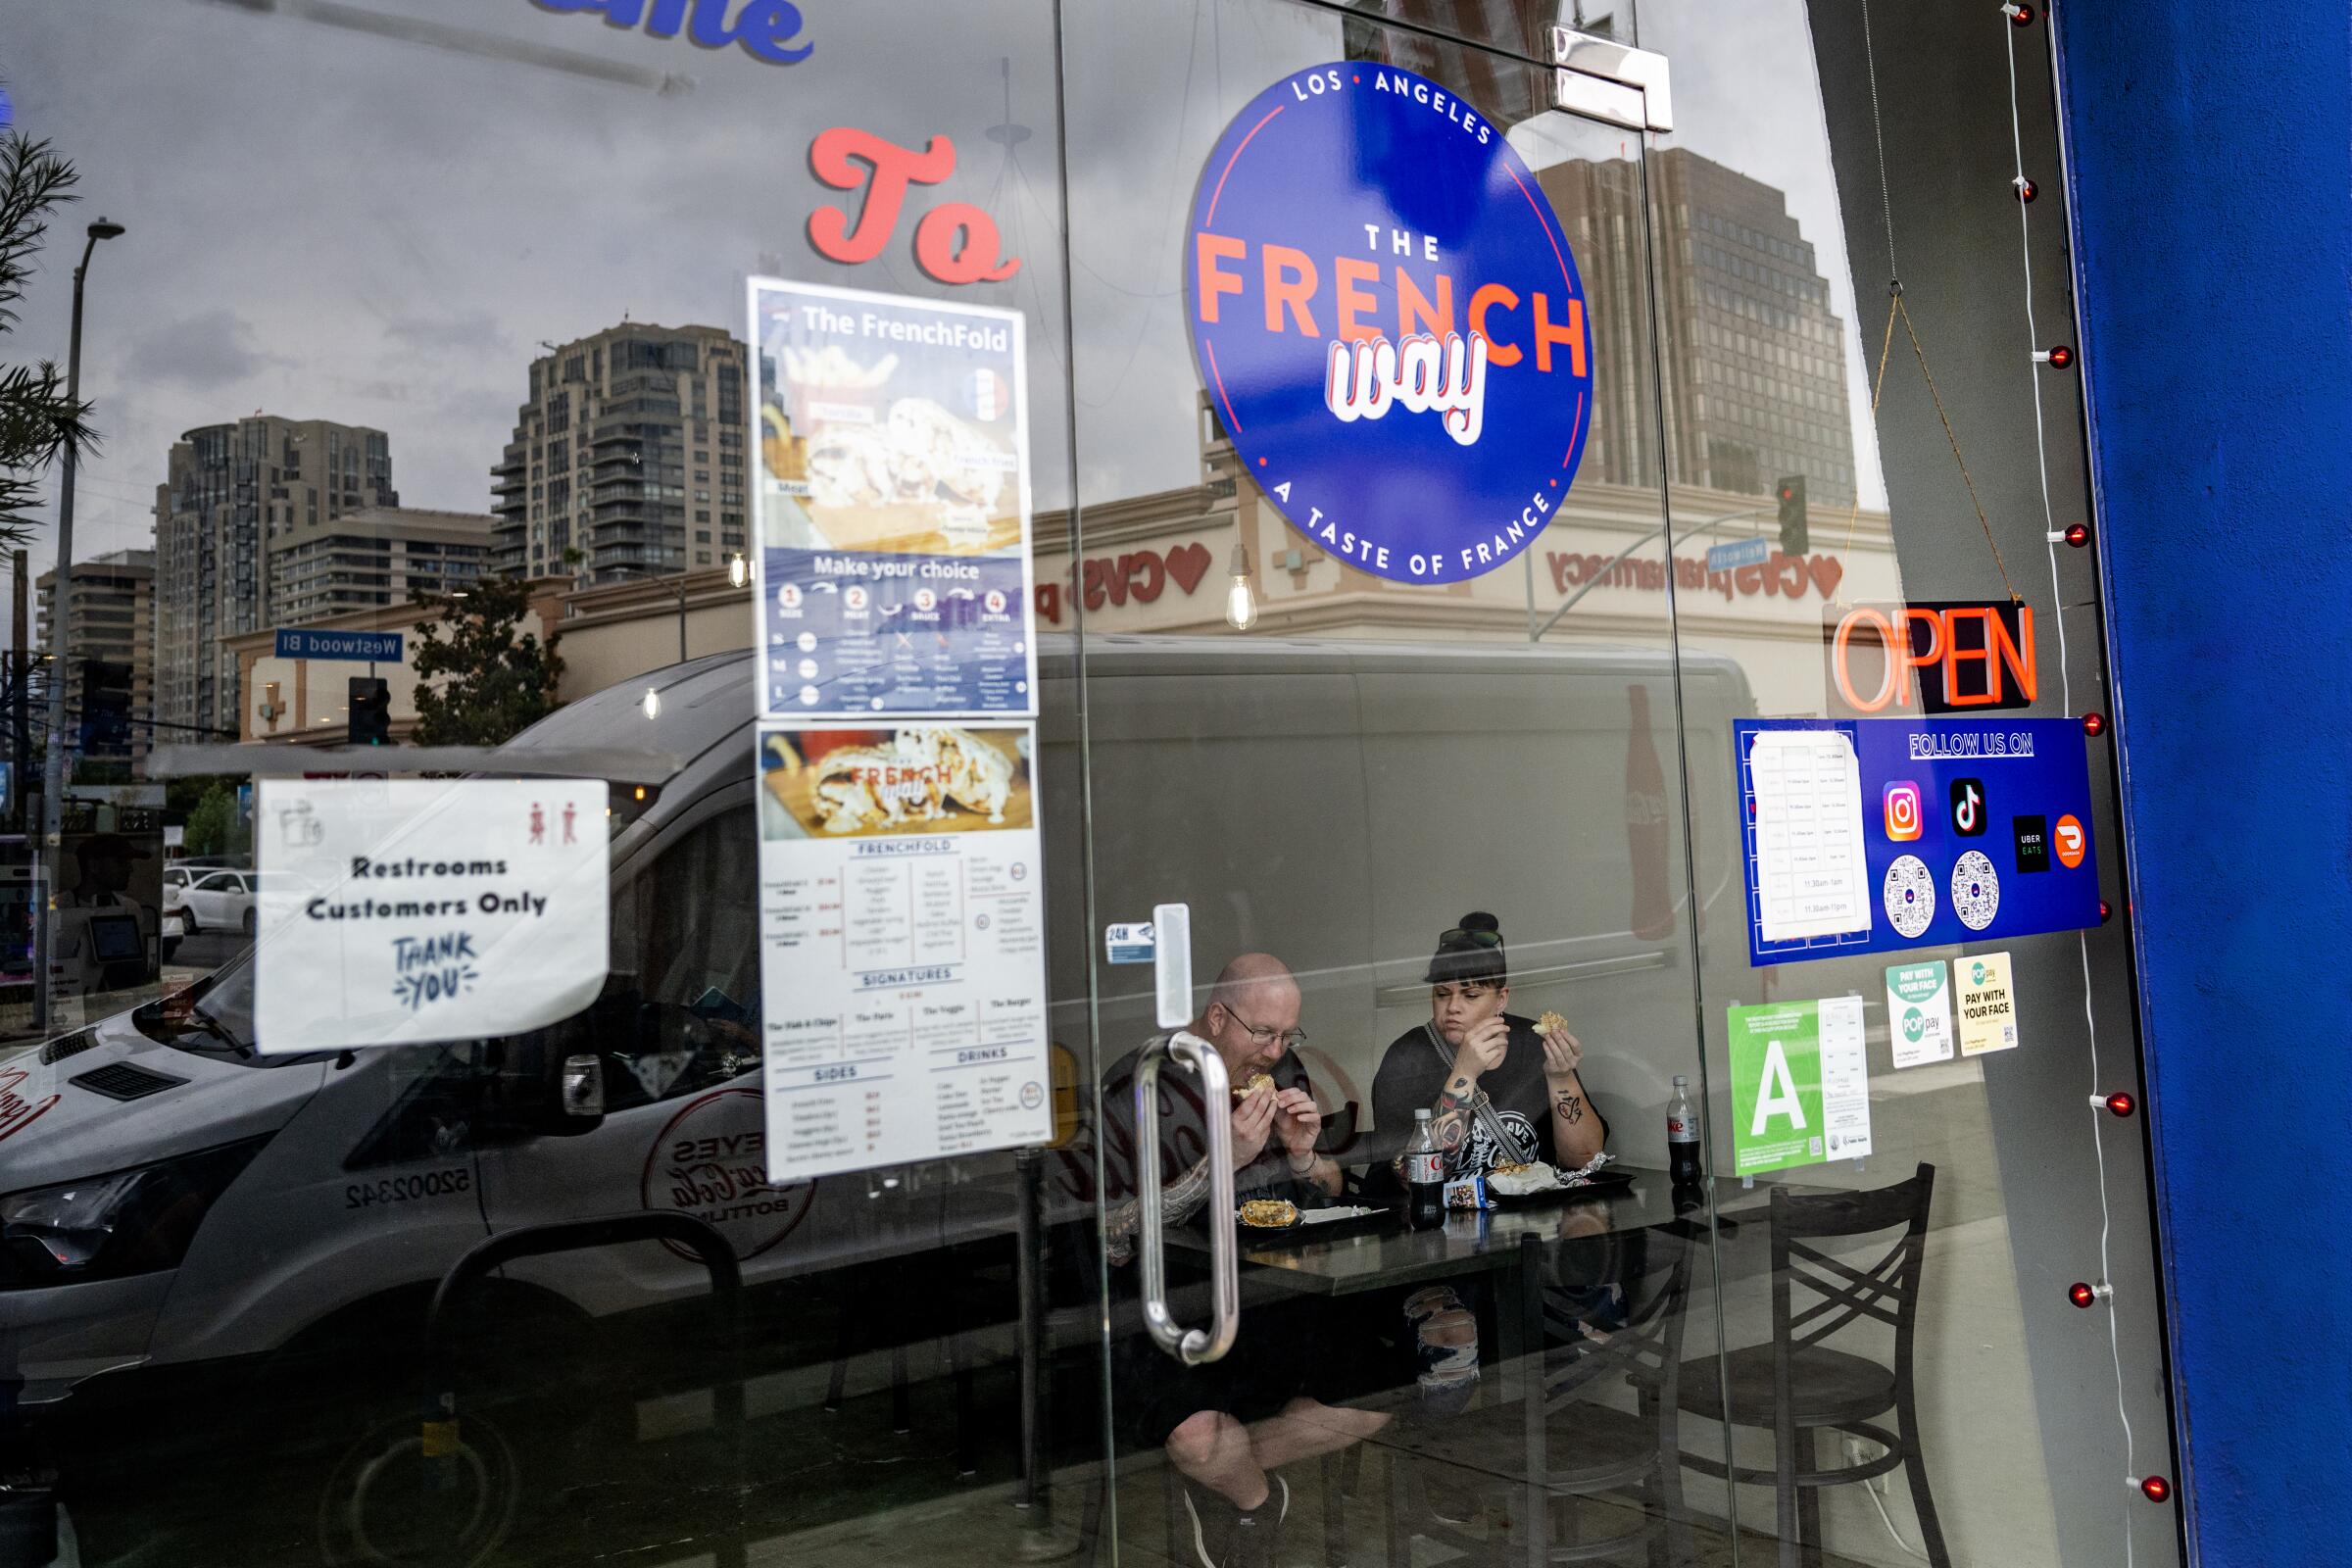 People eat while seated behind a glass door that says "The French Way"